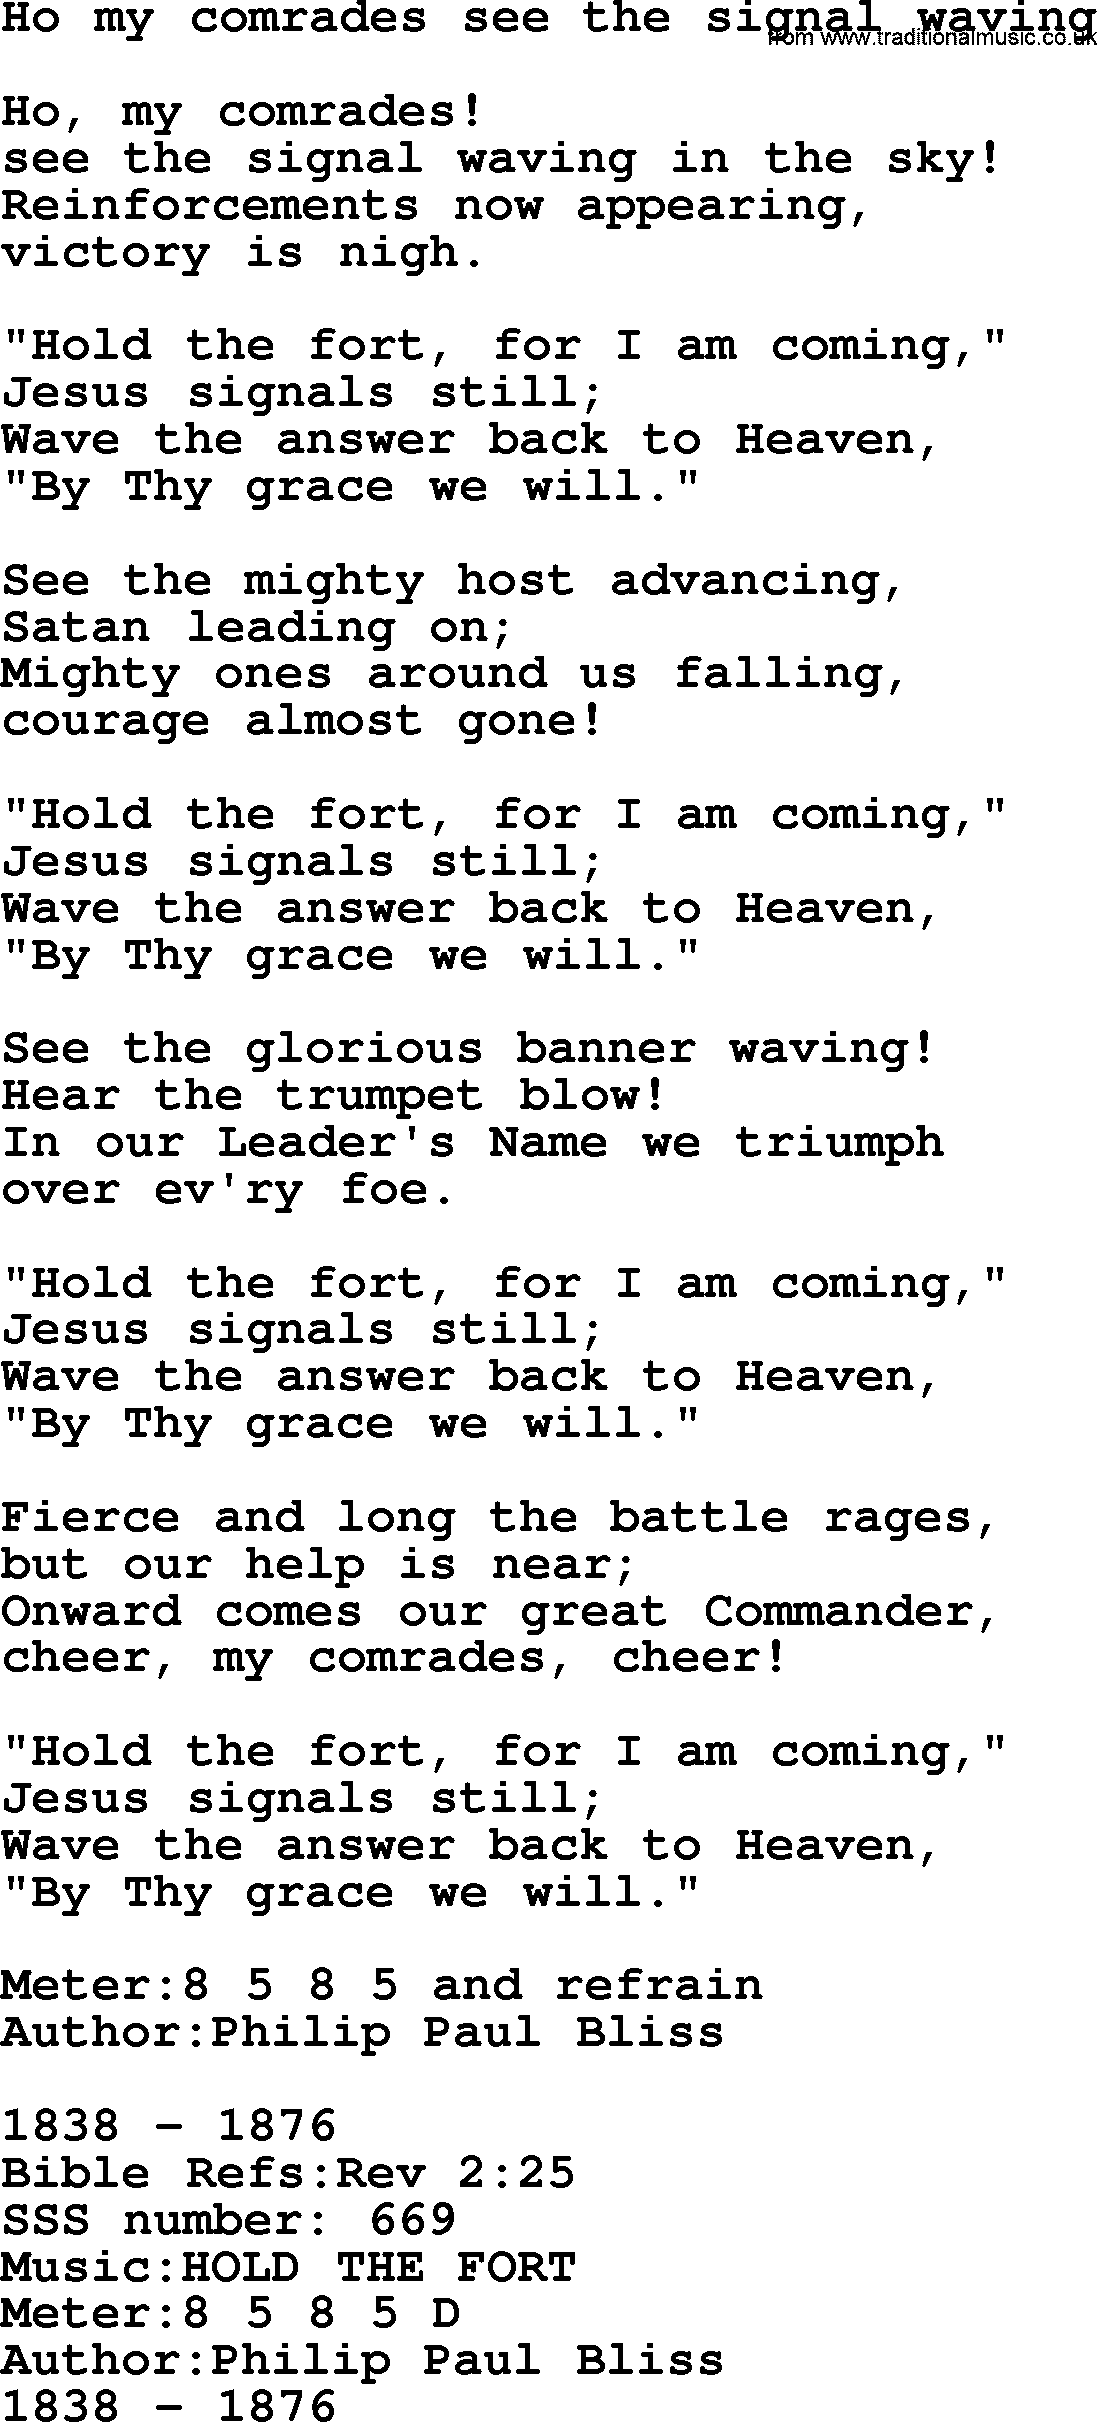 Sacred Songs and Solos complete(words version), Song: Ho My Comrades ...